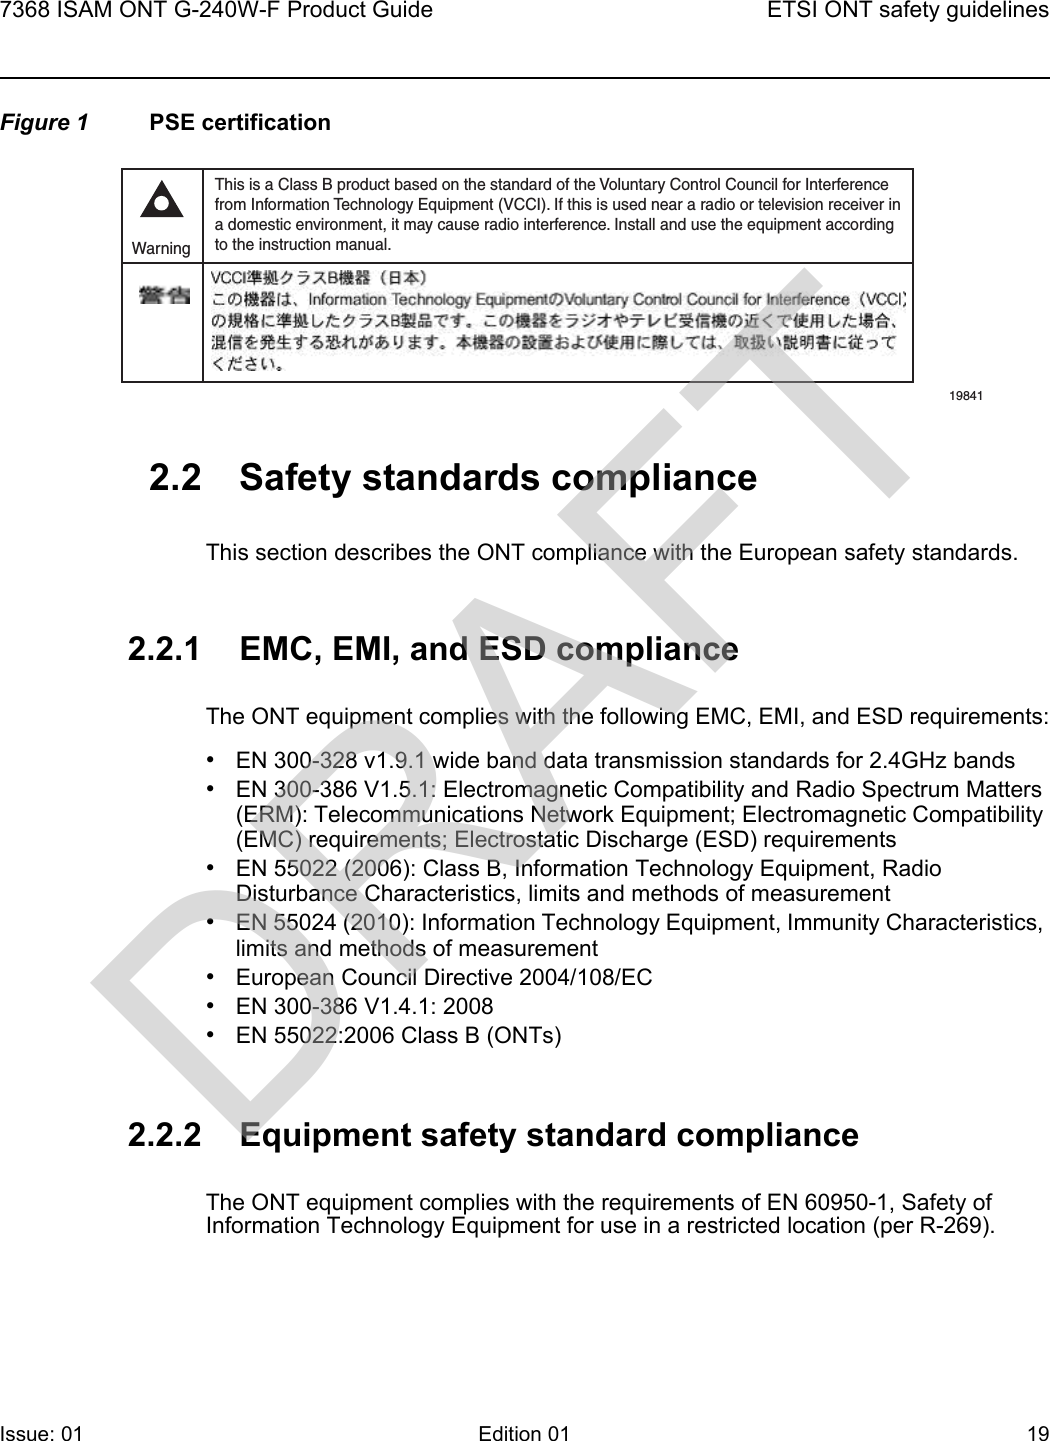 7368 ISAM ONT G-240W-F Product Guide ETSI ONT safety guidelinesIssue: 01 Edition 01 19 Figure 1 PSE certification2.2 Safety standards complianceThis section describes the ONT compliance with the European safety standards.2.2.1 EMC, EMI, and ESD complianceThe ONT equipment complies with the following EMC, EMI, and ESD requirements:•EN 300-328 v1.9.1 wide band data transmission standards for 2.4GHz bands•EN 300-386 V1.5.1: Electromagnetic Compatibility and Radio Spectrum Matters (ERM): Telecommunications Network Equipment; Electromagnetic Compatibility (EMC) requirements; Electrostatic Discharge (ESD) requirements•EN 55022 (2006): Class B, Information Technology Equipment, Radio Disturbance Characteristics, limits and methods of measurement•EN 55024 (2010): Information Technology Equipment, Immunity Characteristics, limits and methods of measurement•European Council Directive 2004/108/EC•EN 300-386 V1.4.1: 2008•EN 55022:2006 Class B (ONTs)2.2.2 Equipment safety standard complianceThe ONT equipment complies with the requirements of EN 60950-1, Safety of Information Technology Equipment for use in a restricted location (per R-269).This is a Class B product based on the standard of the Voluntary Control Council for Interferencefrom Information Technology Equipment (VCCI). If this is used near a radio or television receiver ina domestic environment, it may cause radio interference. Install and use the equipment accordingto the instruction manual. Warning19841DRAFT